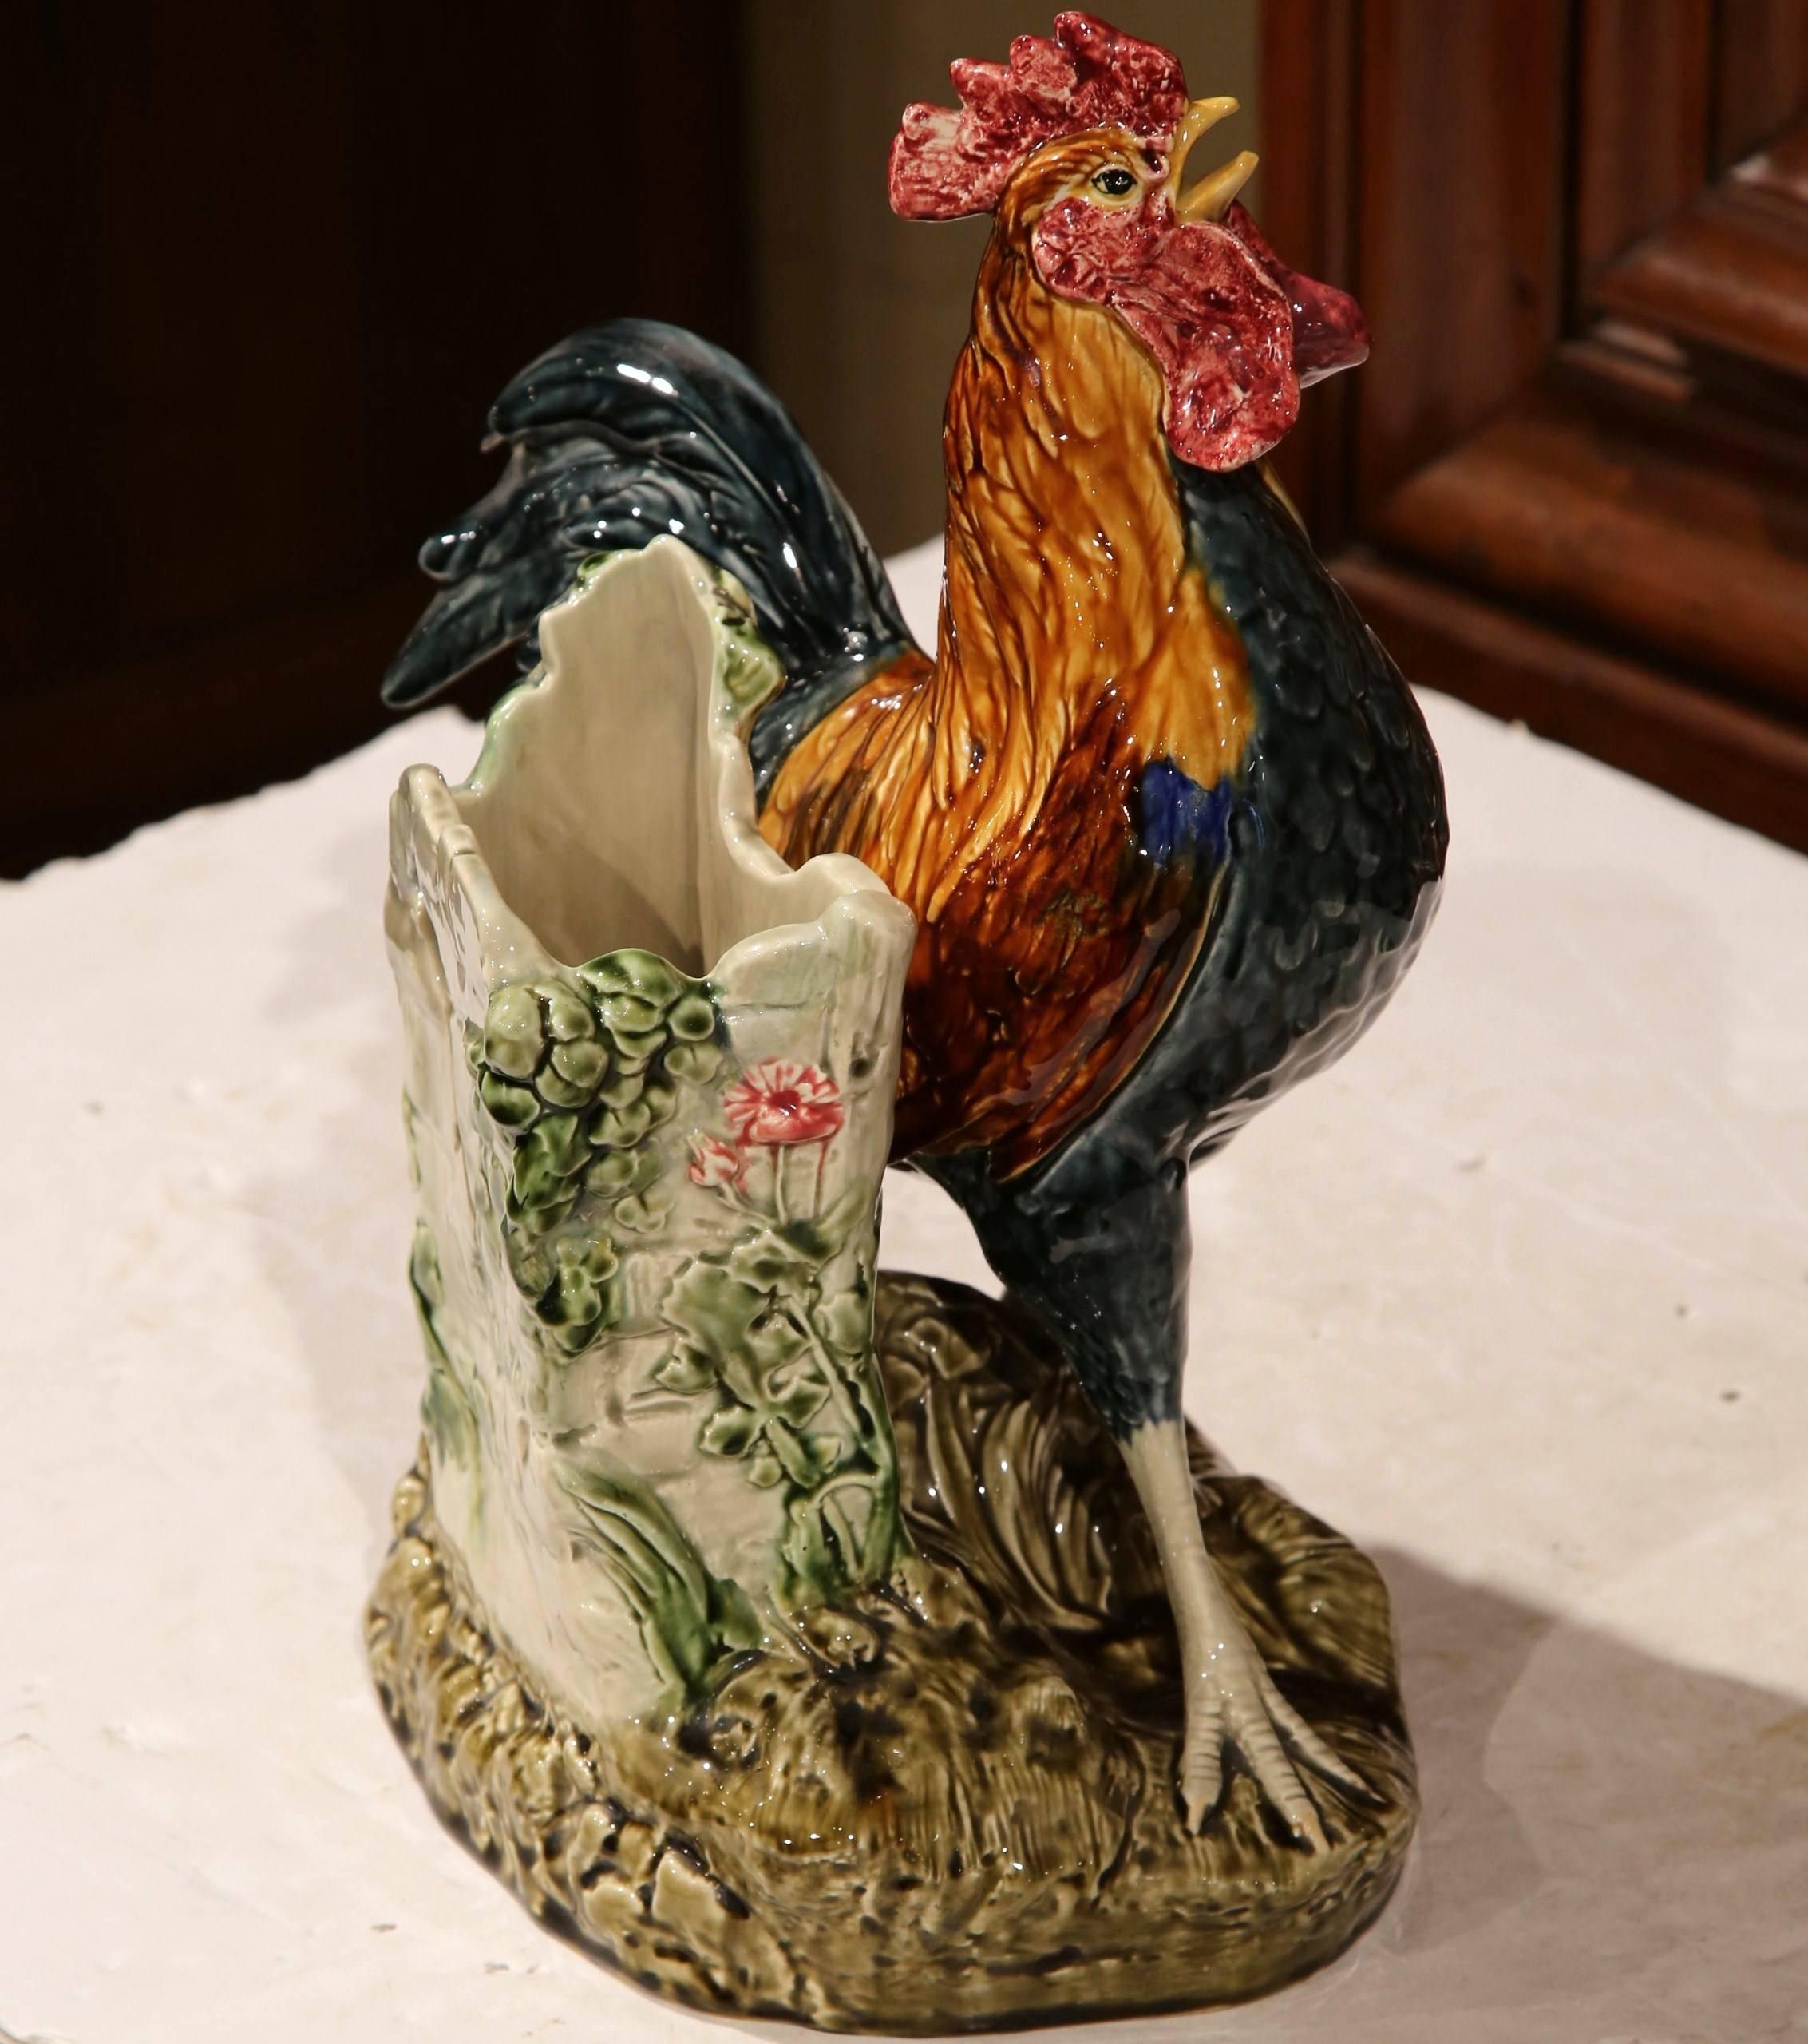 19th Century French Hand-Painted Faience Rooster Vase Signed Carrier-Belleuse 2